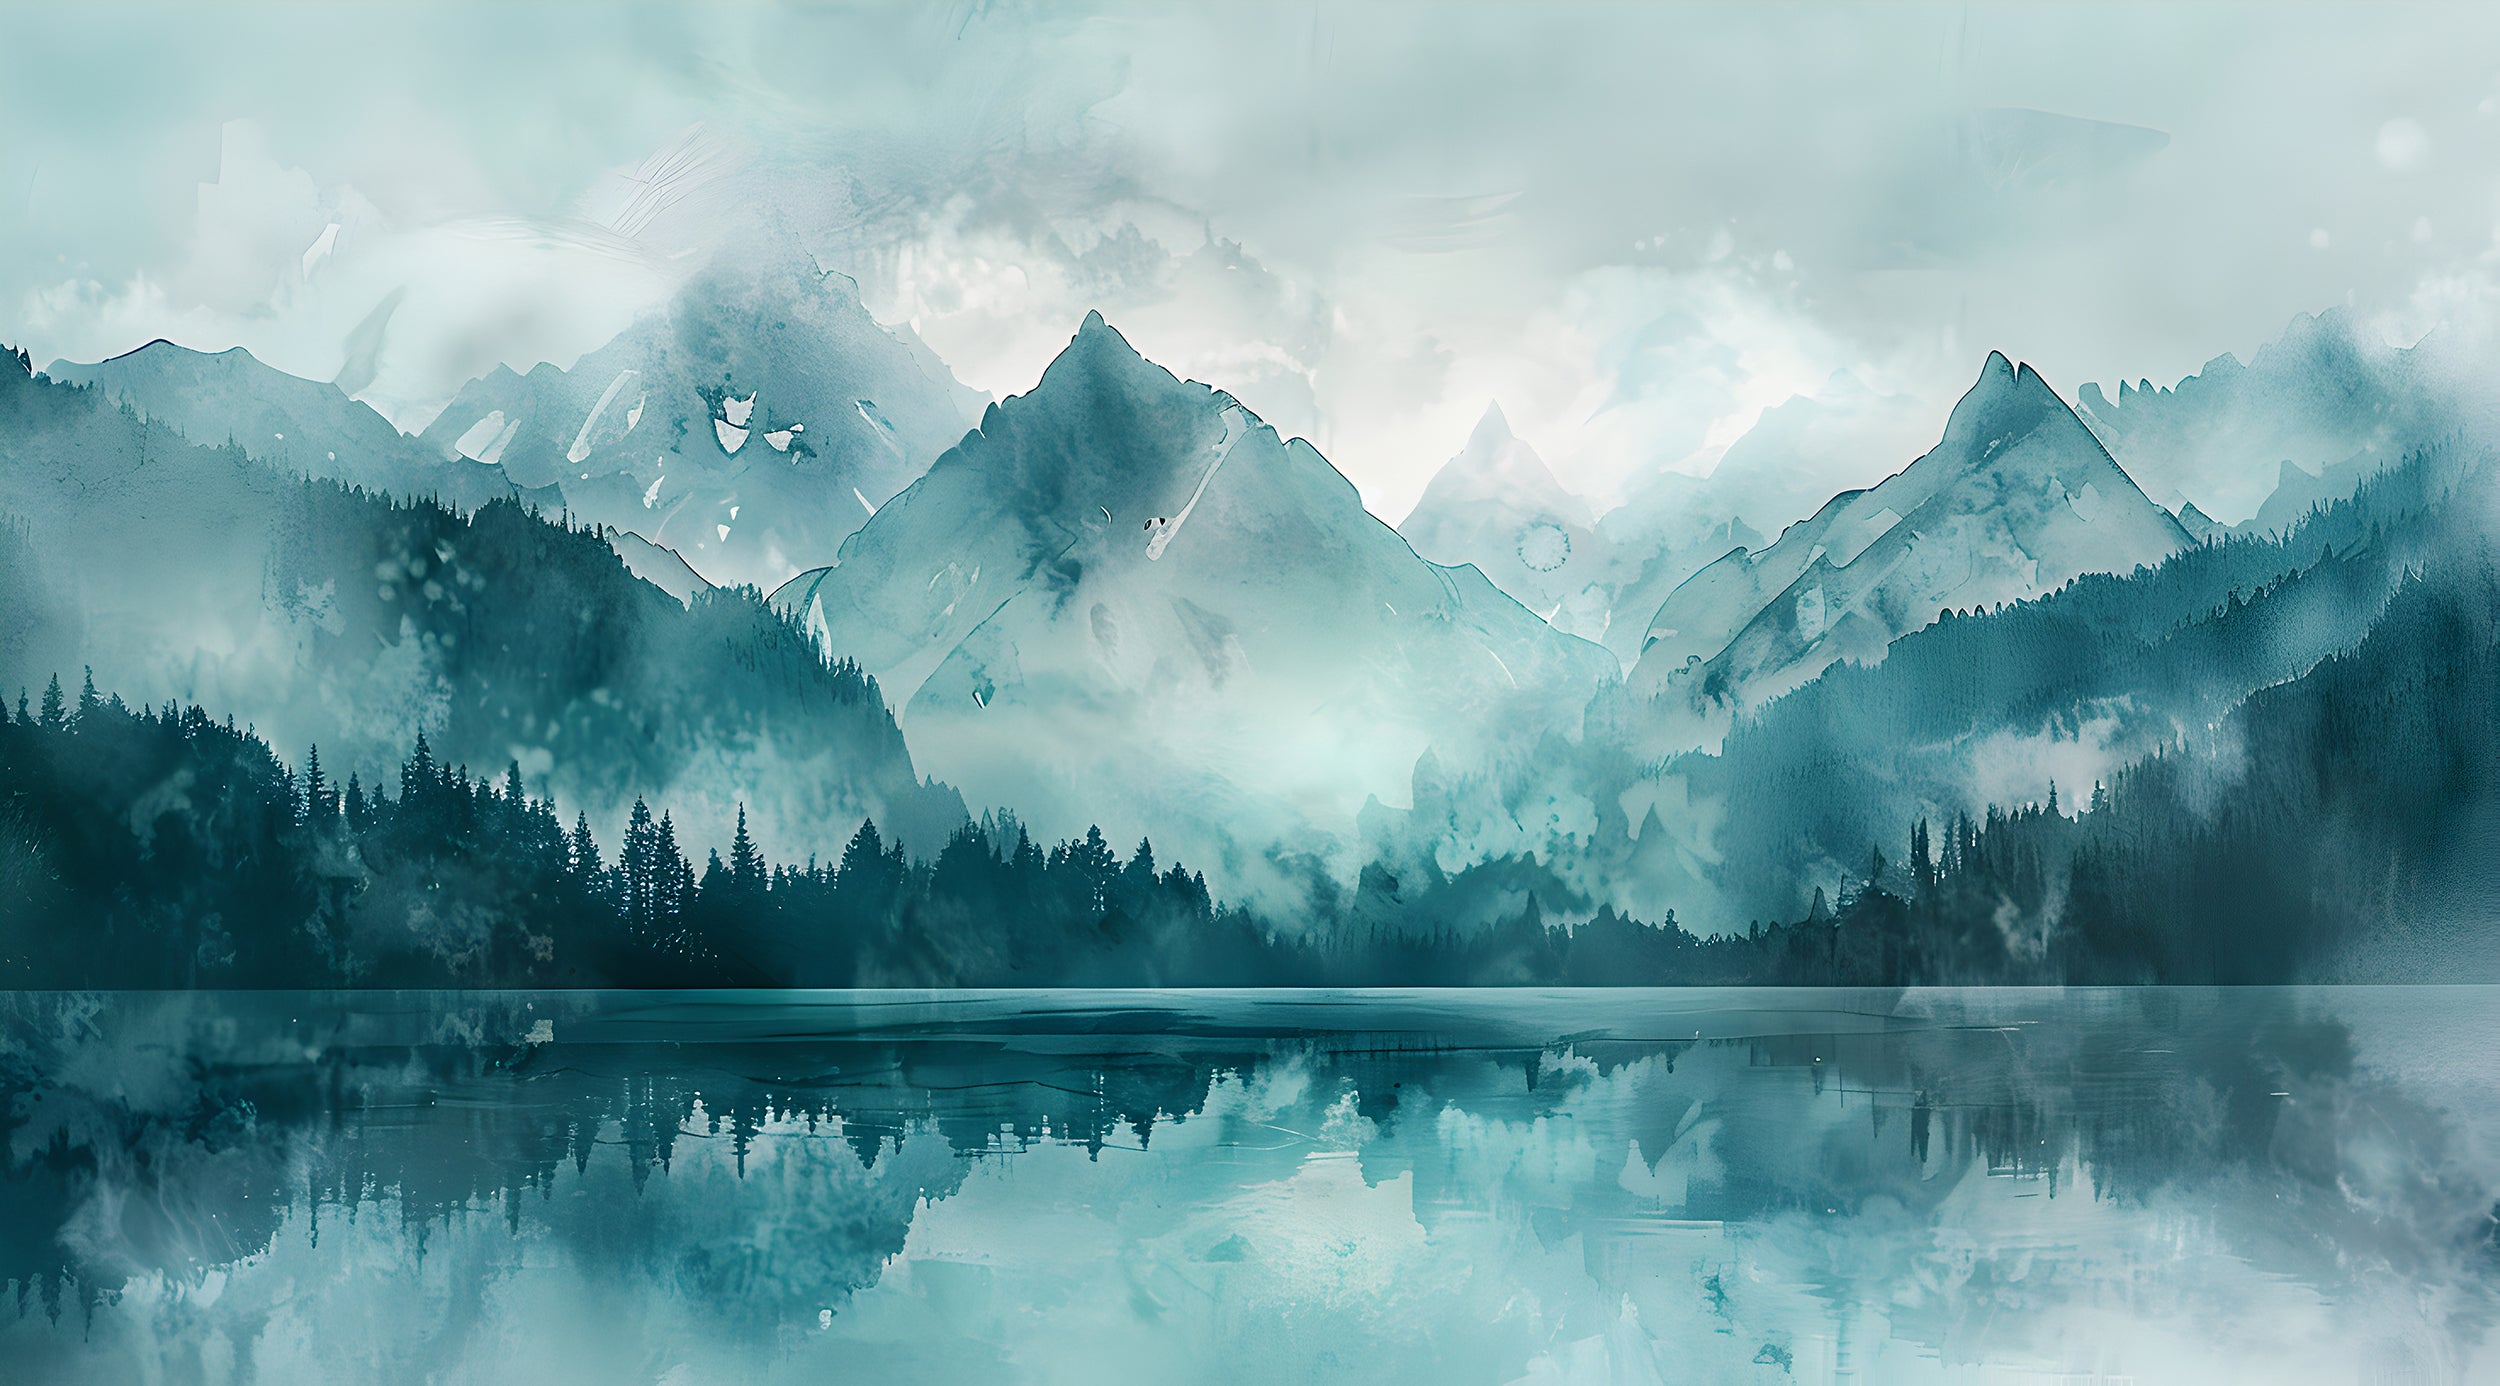 Mountain Lake in Mint Colors Mural, Watercolor Forest and Mountains Wallpaper, Peel and Stick Green Lake Landscape Art, Abstract Nature Decor